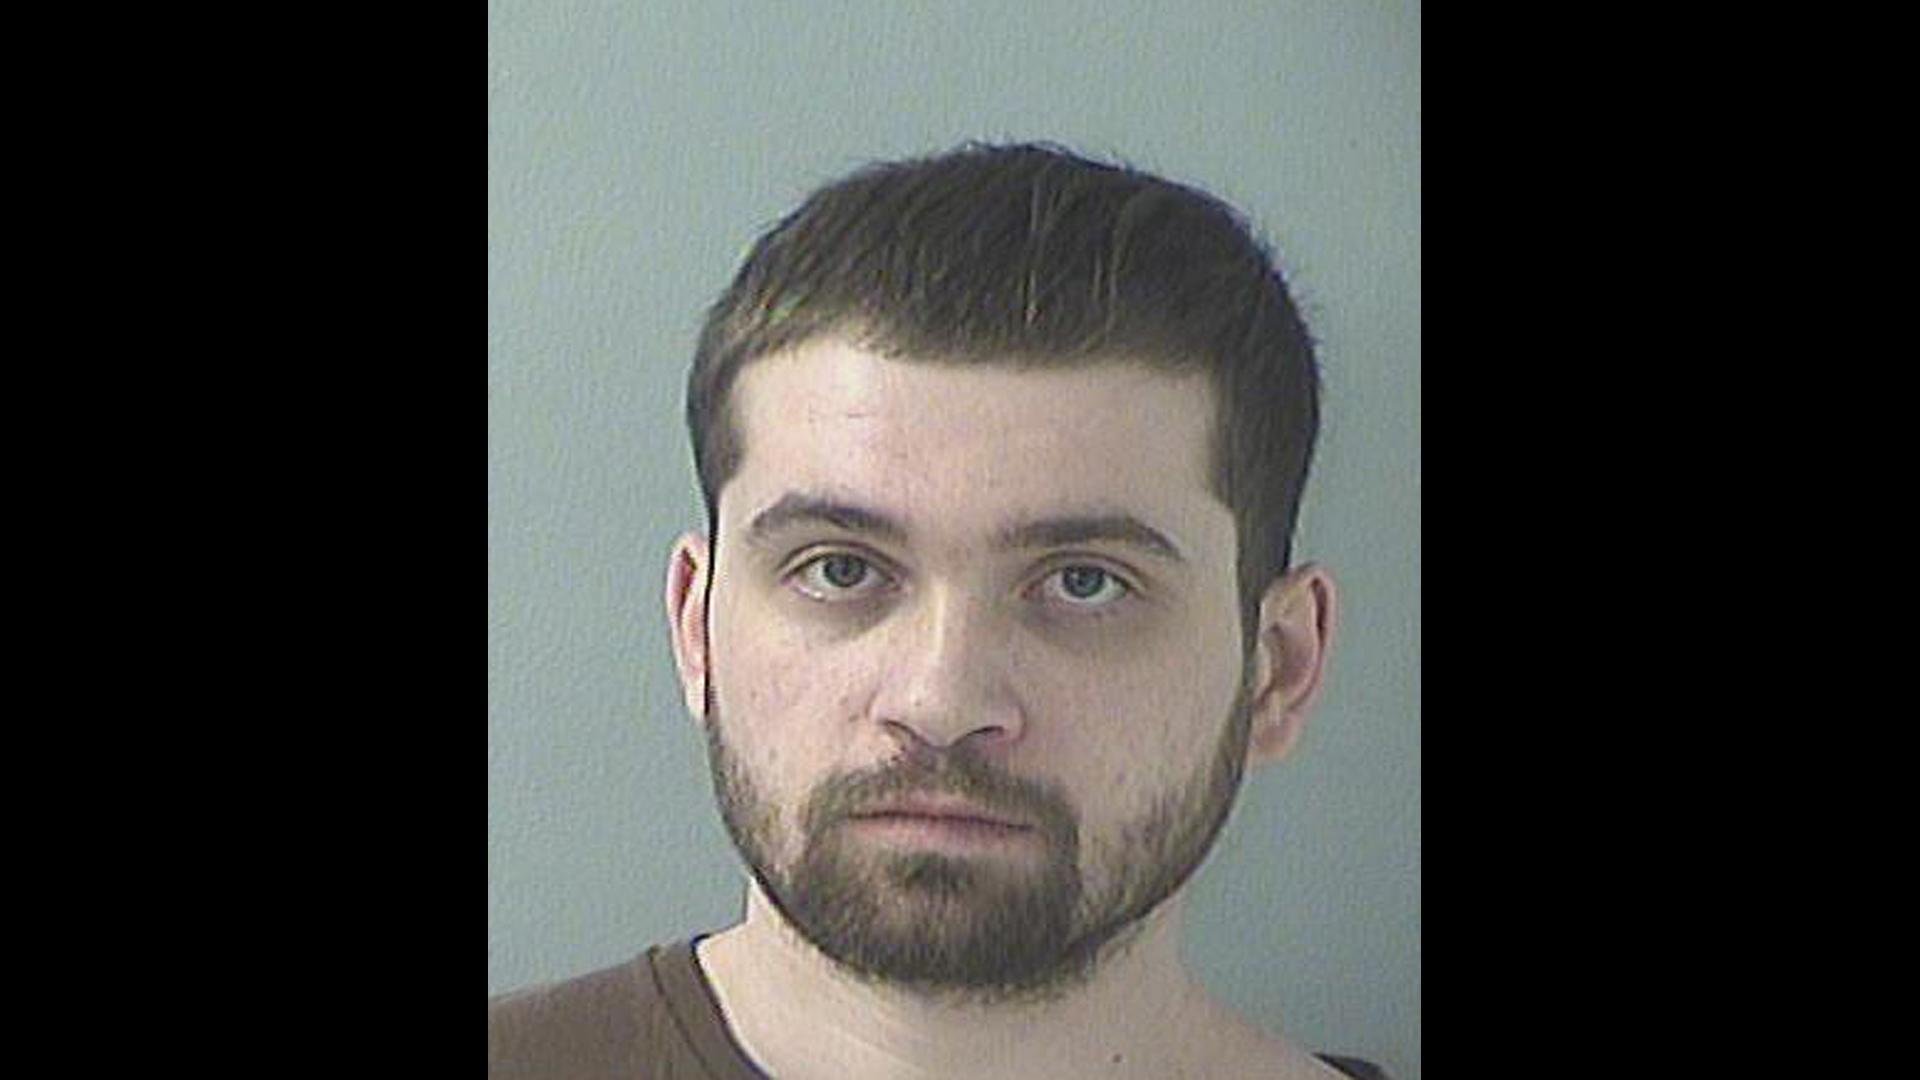 This 2019 booking photo provided by the Butler County (Ohio) Jail shows Brian Rini in Hamilton, Ohio. (Butler County (Ohio) Jail via AP)